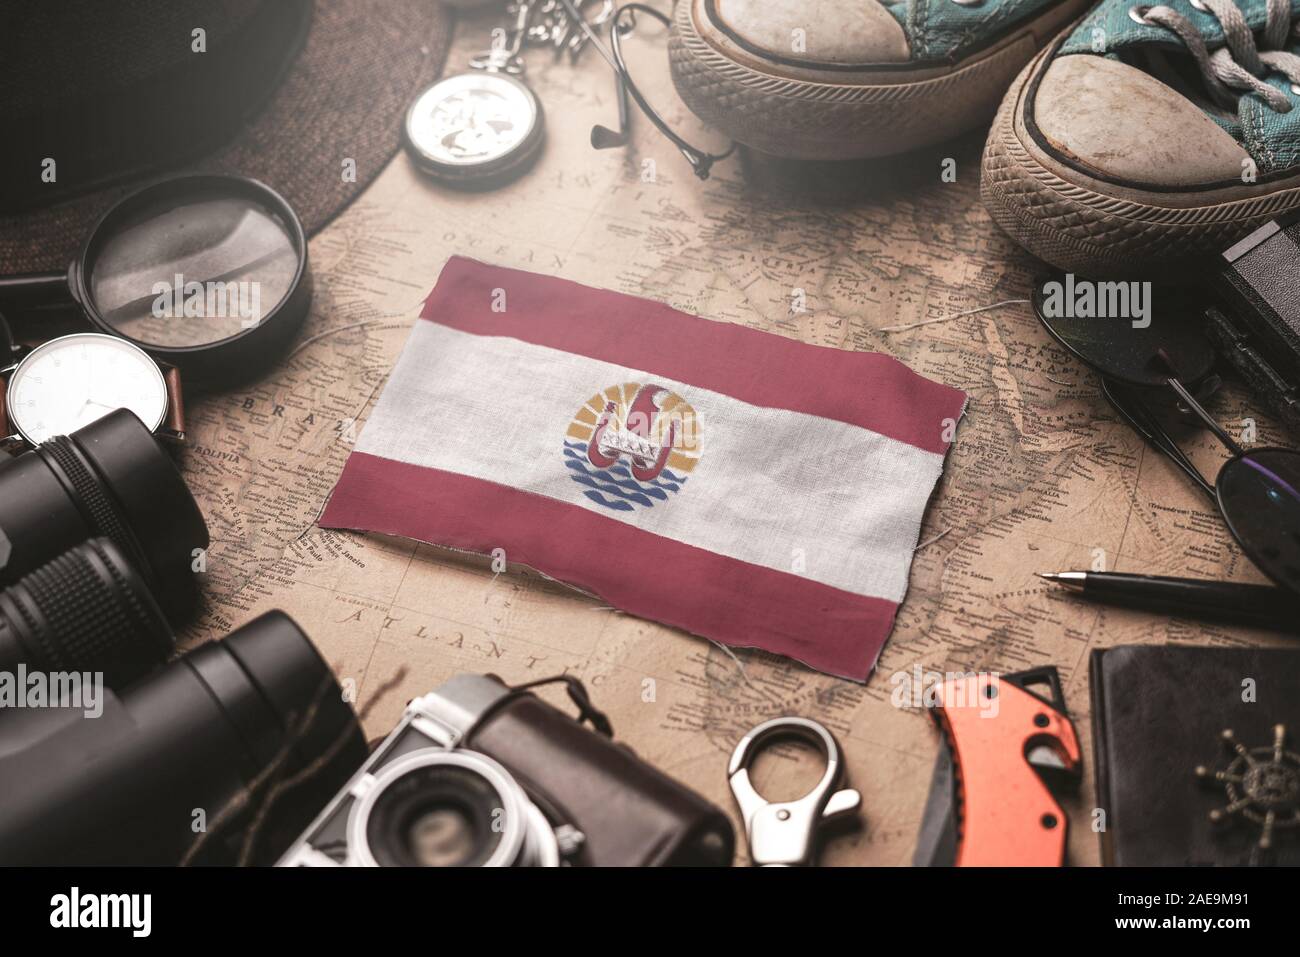 French Polynesia Flag Between Traveler's Accessories on Old Vintage Map. Tourist Destination Concept. Stock Photo